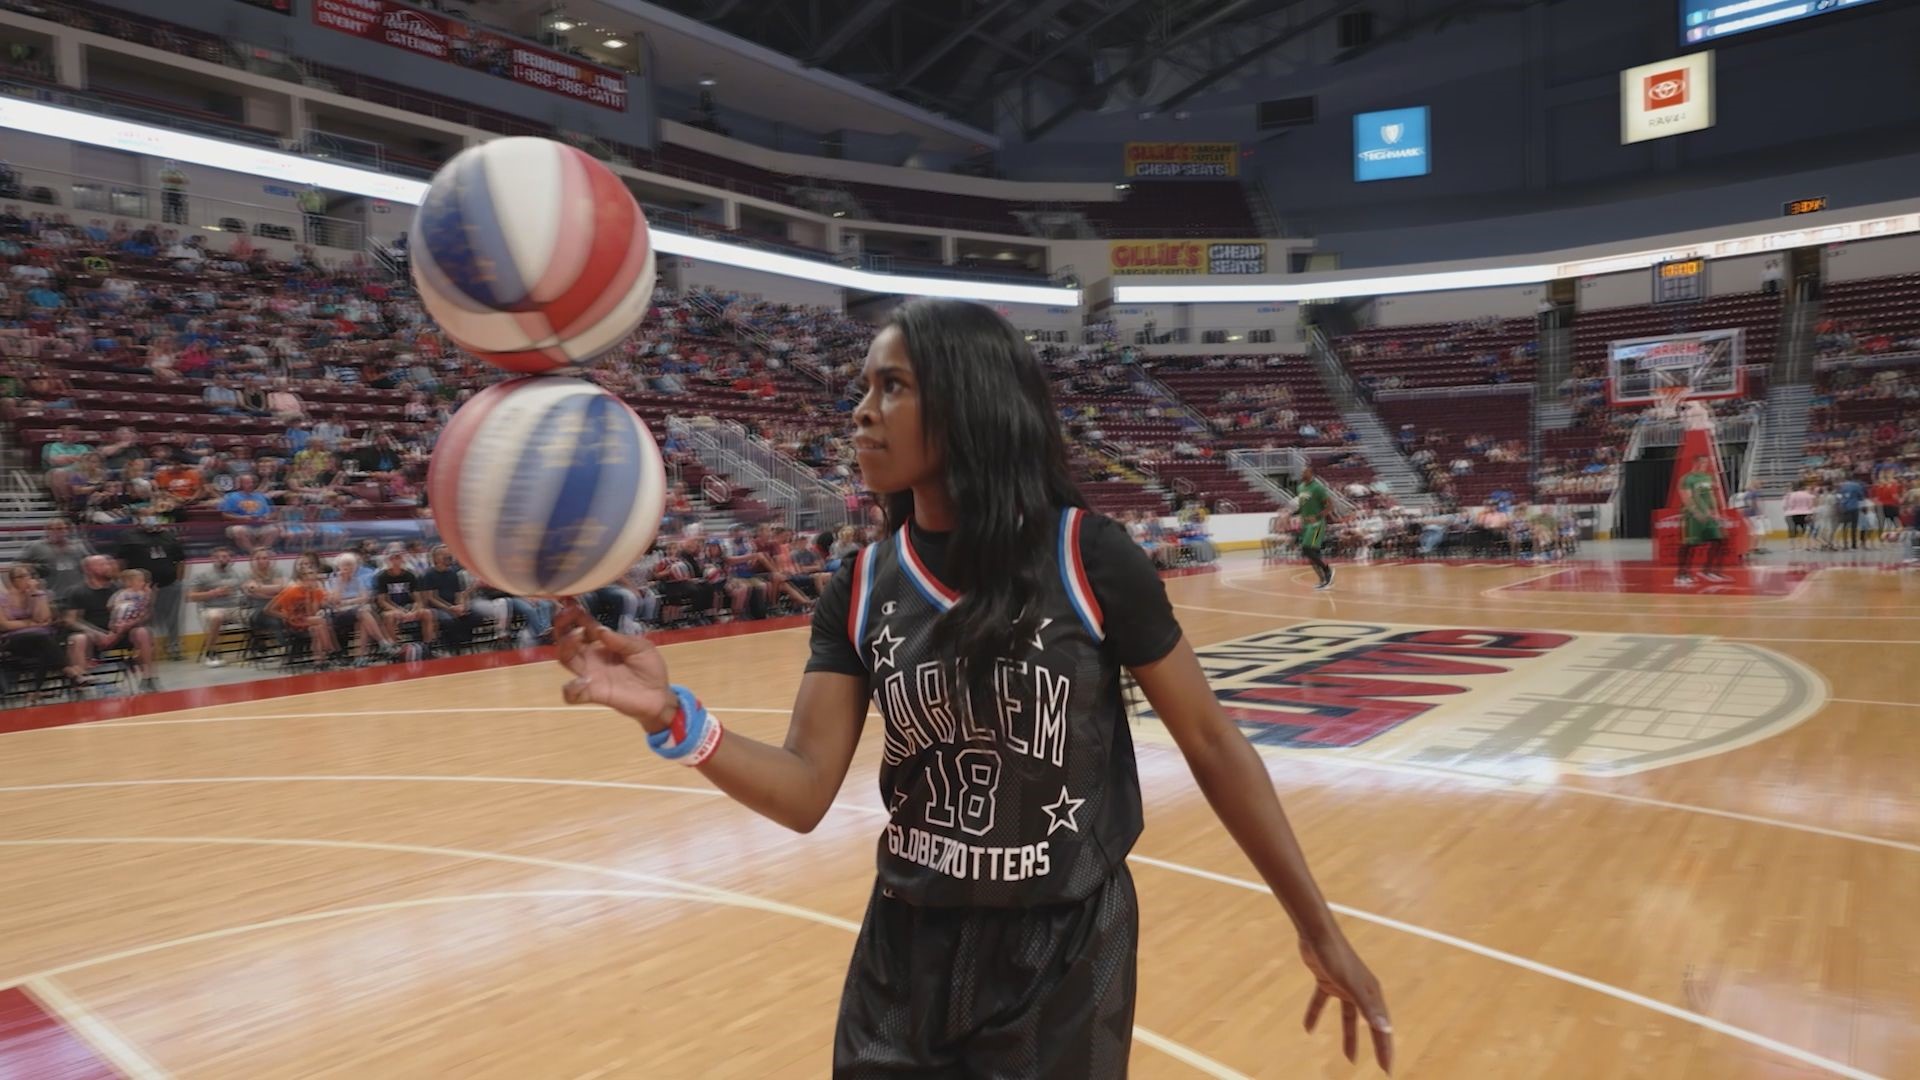 Sponsored by: The Harlem Globetrotters. The Harlem Globetrotters are coming to DC and Kristen gets a behind the scenes look at their iconic tricks.